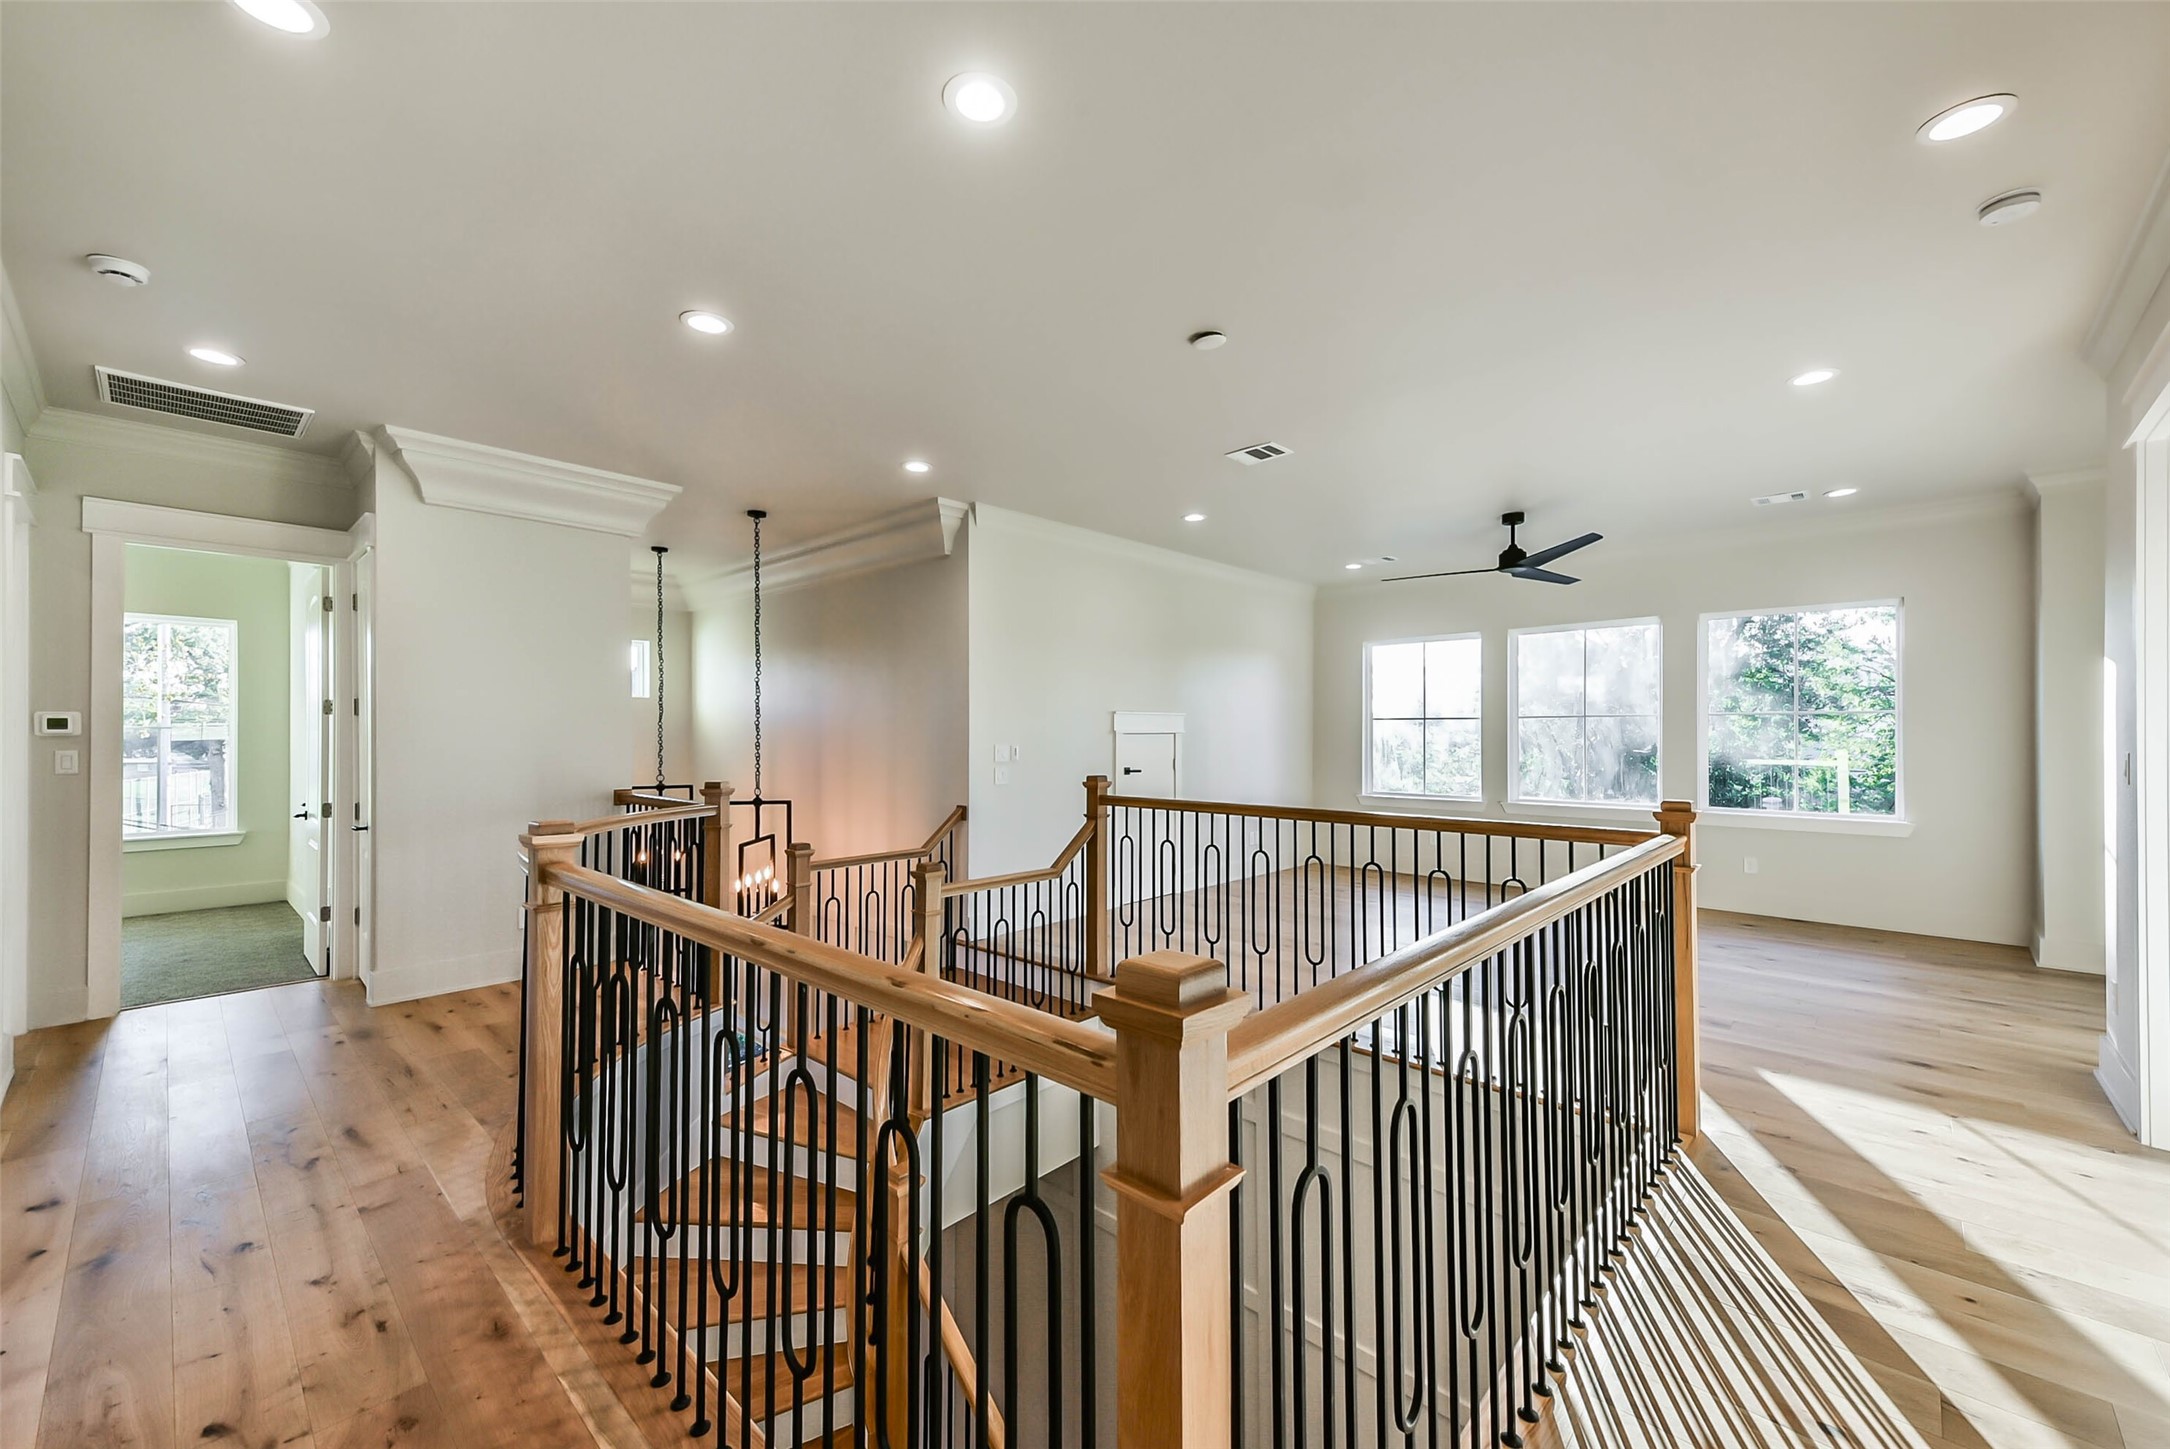 The upstairs hall and game room have wide plank white oak floors and large windows allowing natural light to flow throughout the space.